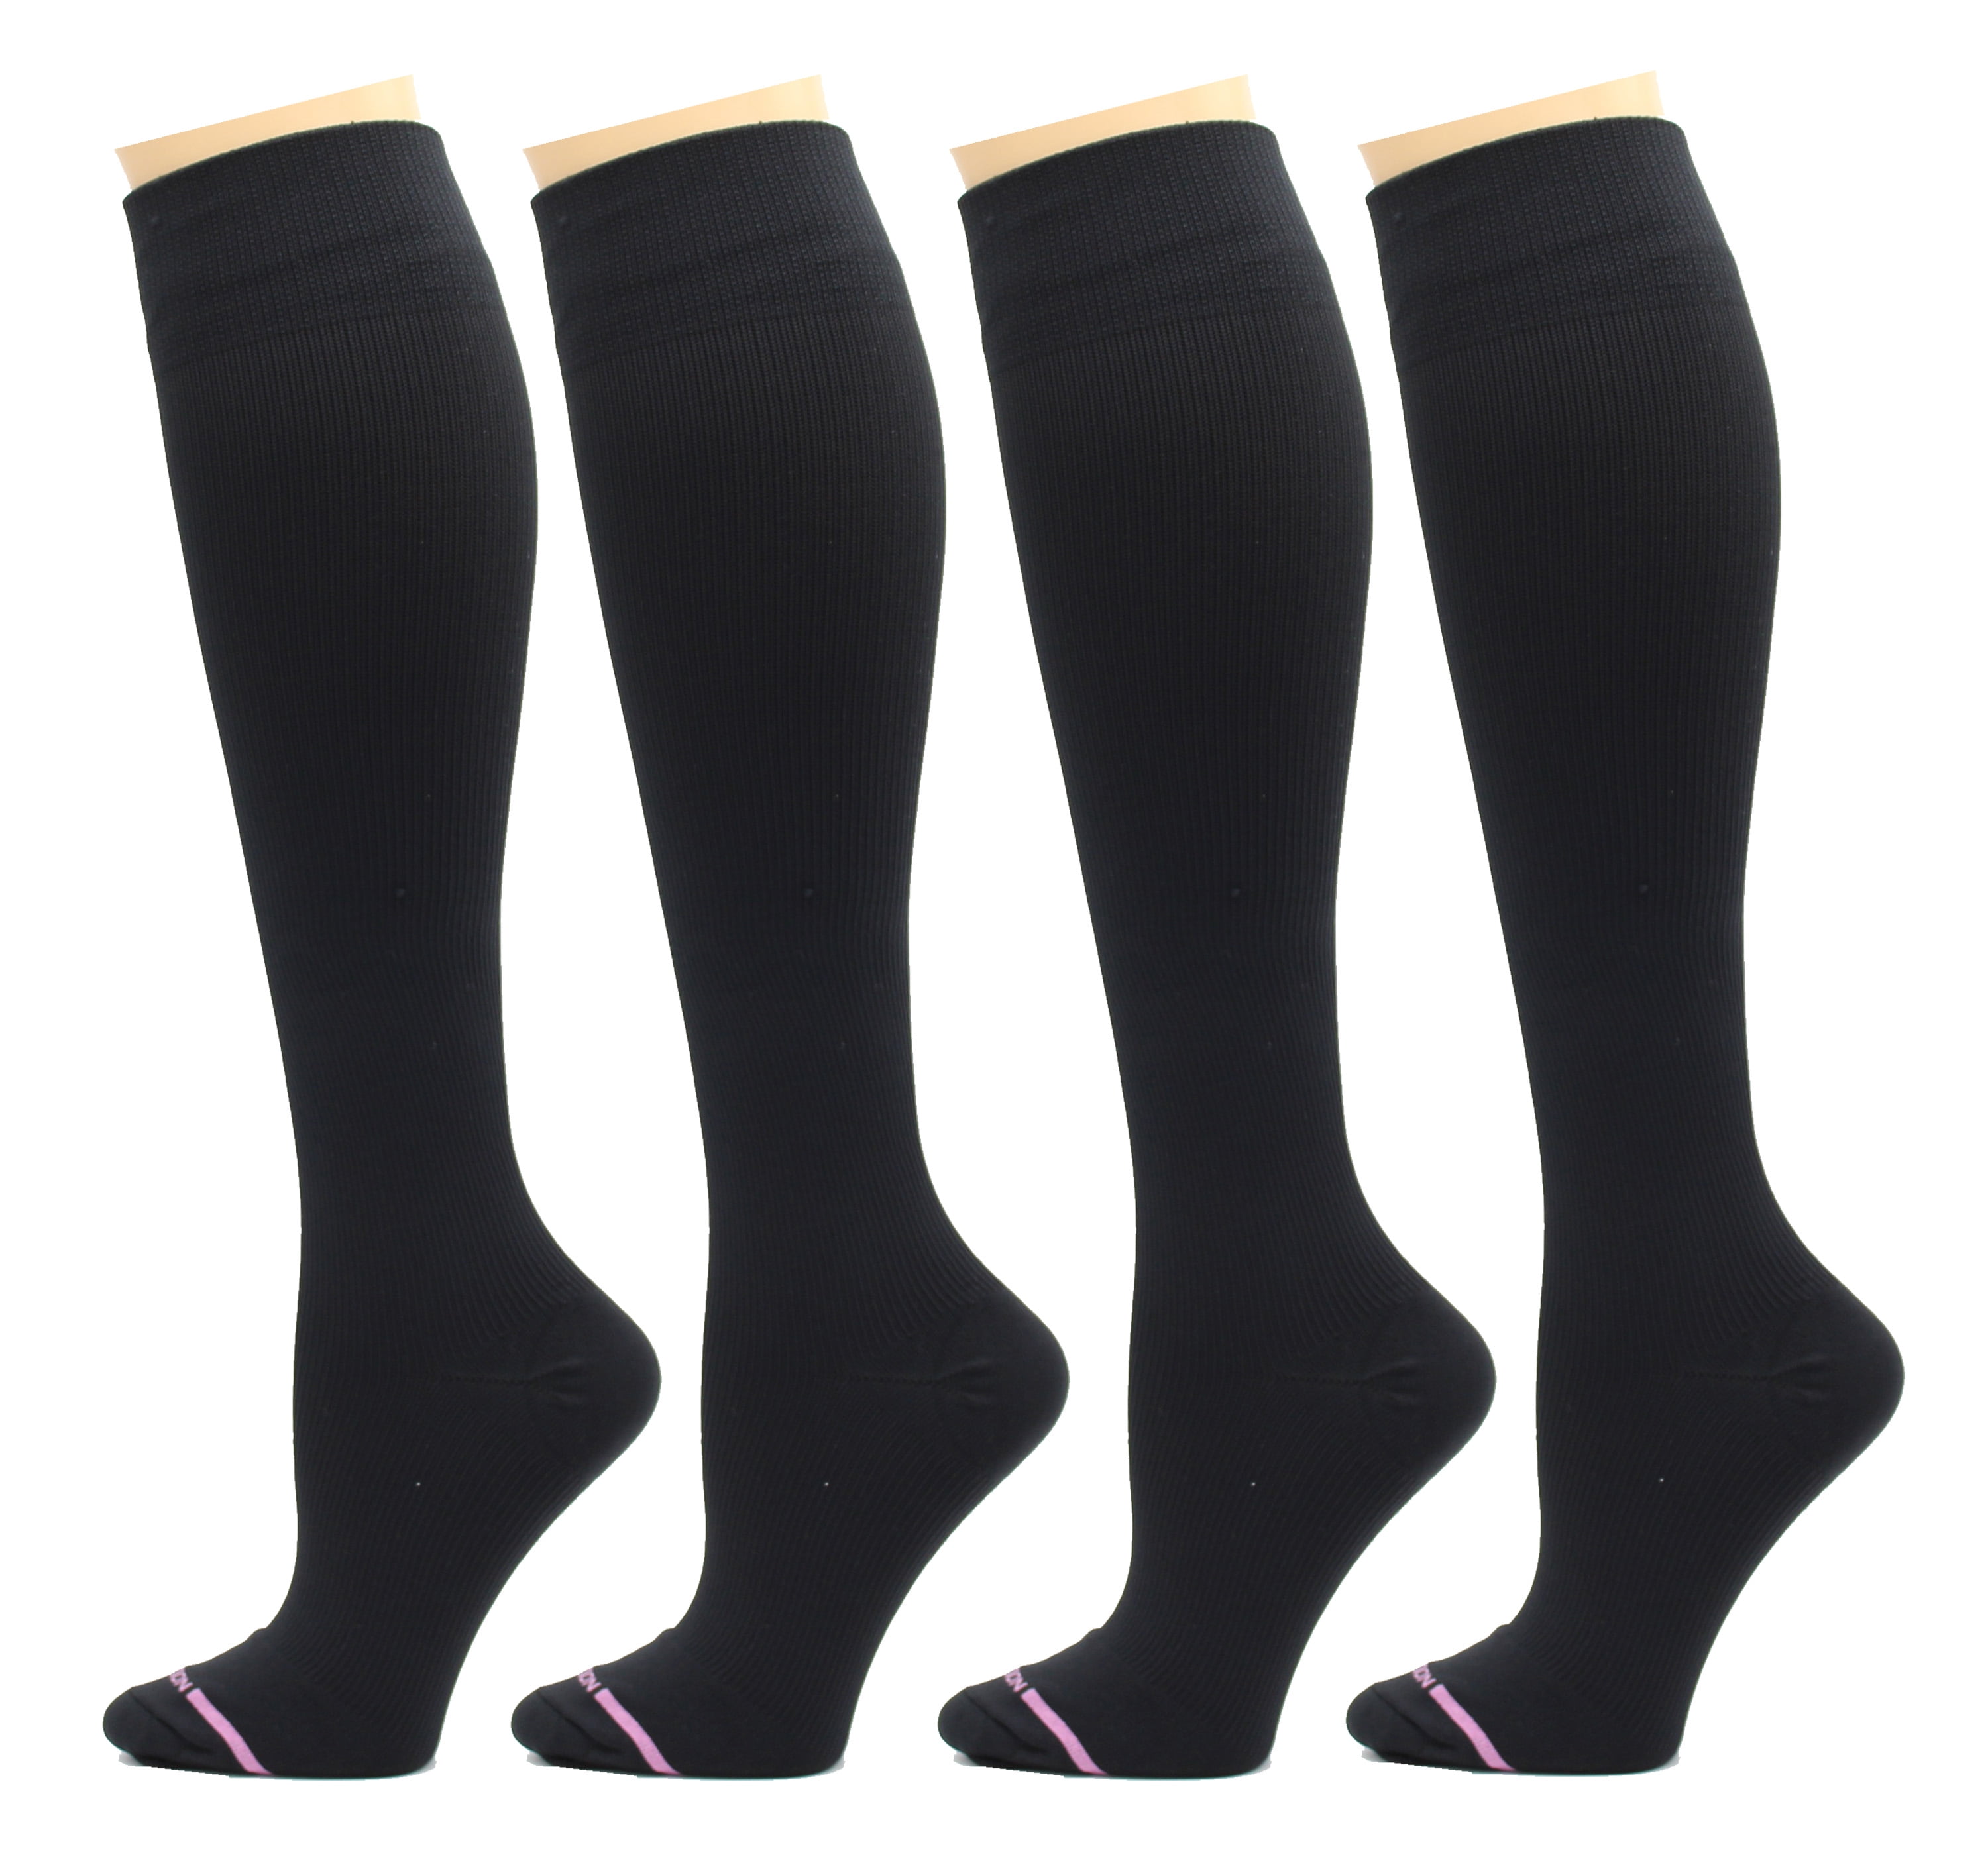 Dr. Motion 4 Pairs Pack Women's Graduated Compression Knee High Socks ...